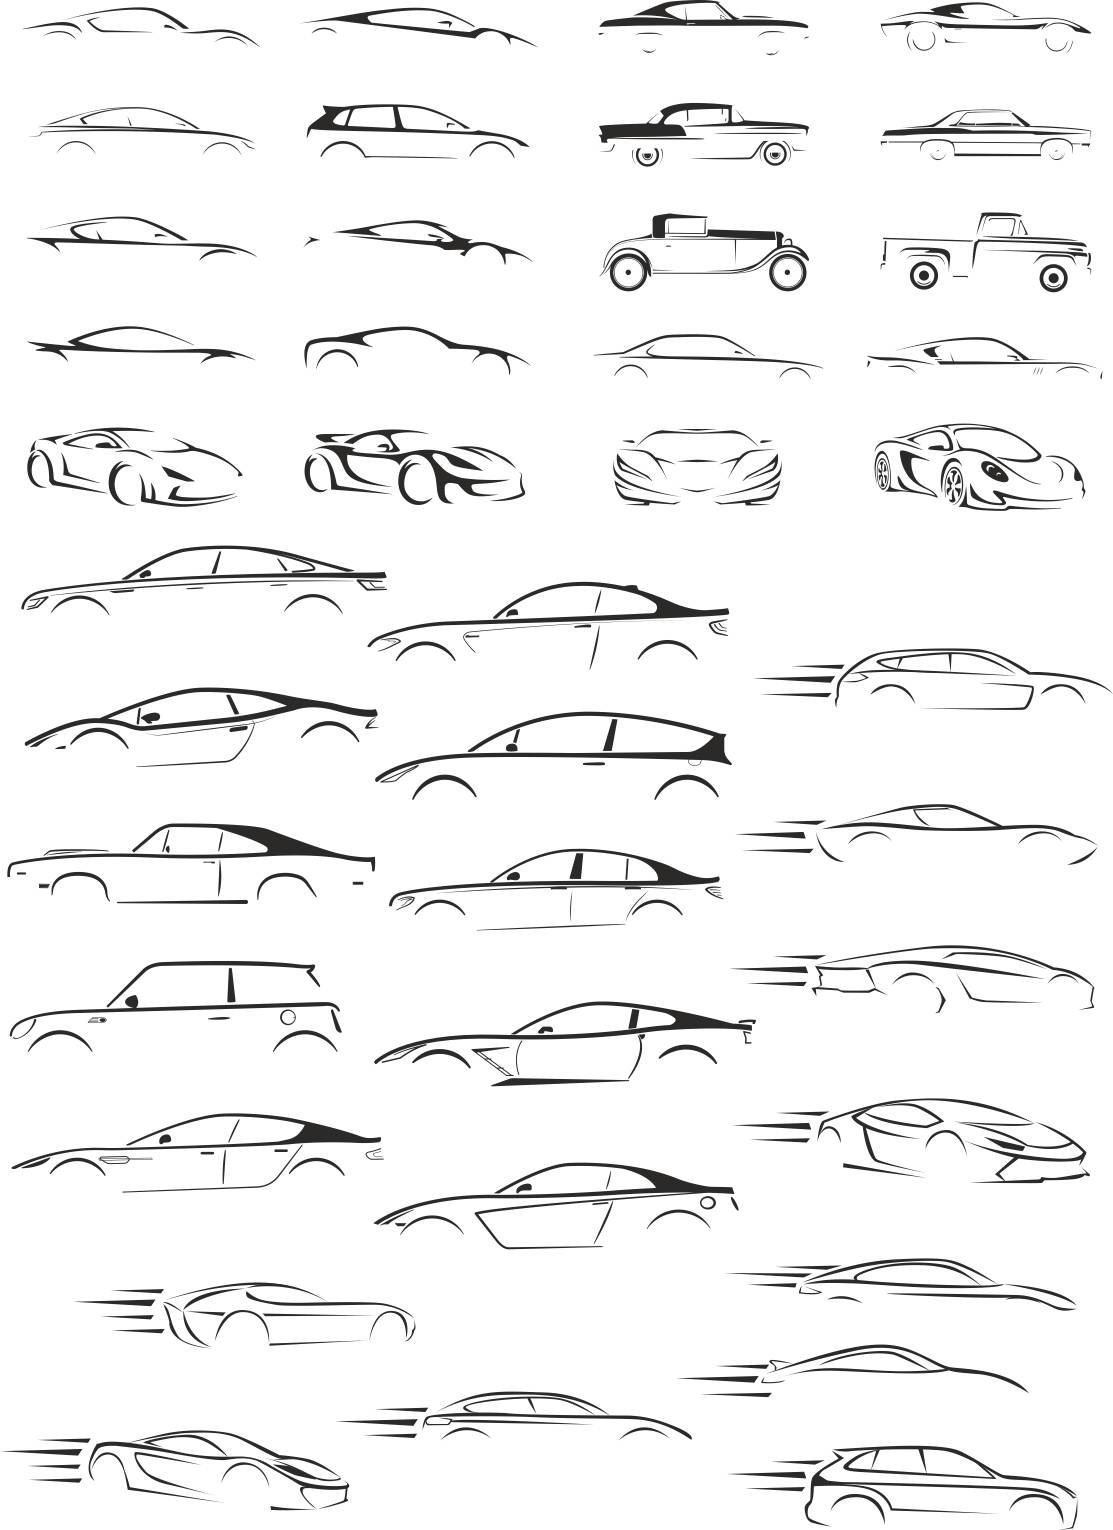 Cars Silhouettes Collection Free Vector cdr Download - 3axis.co